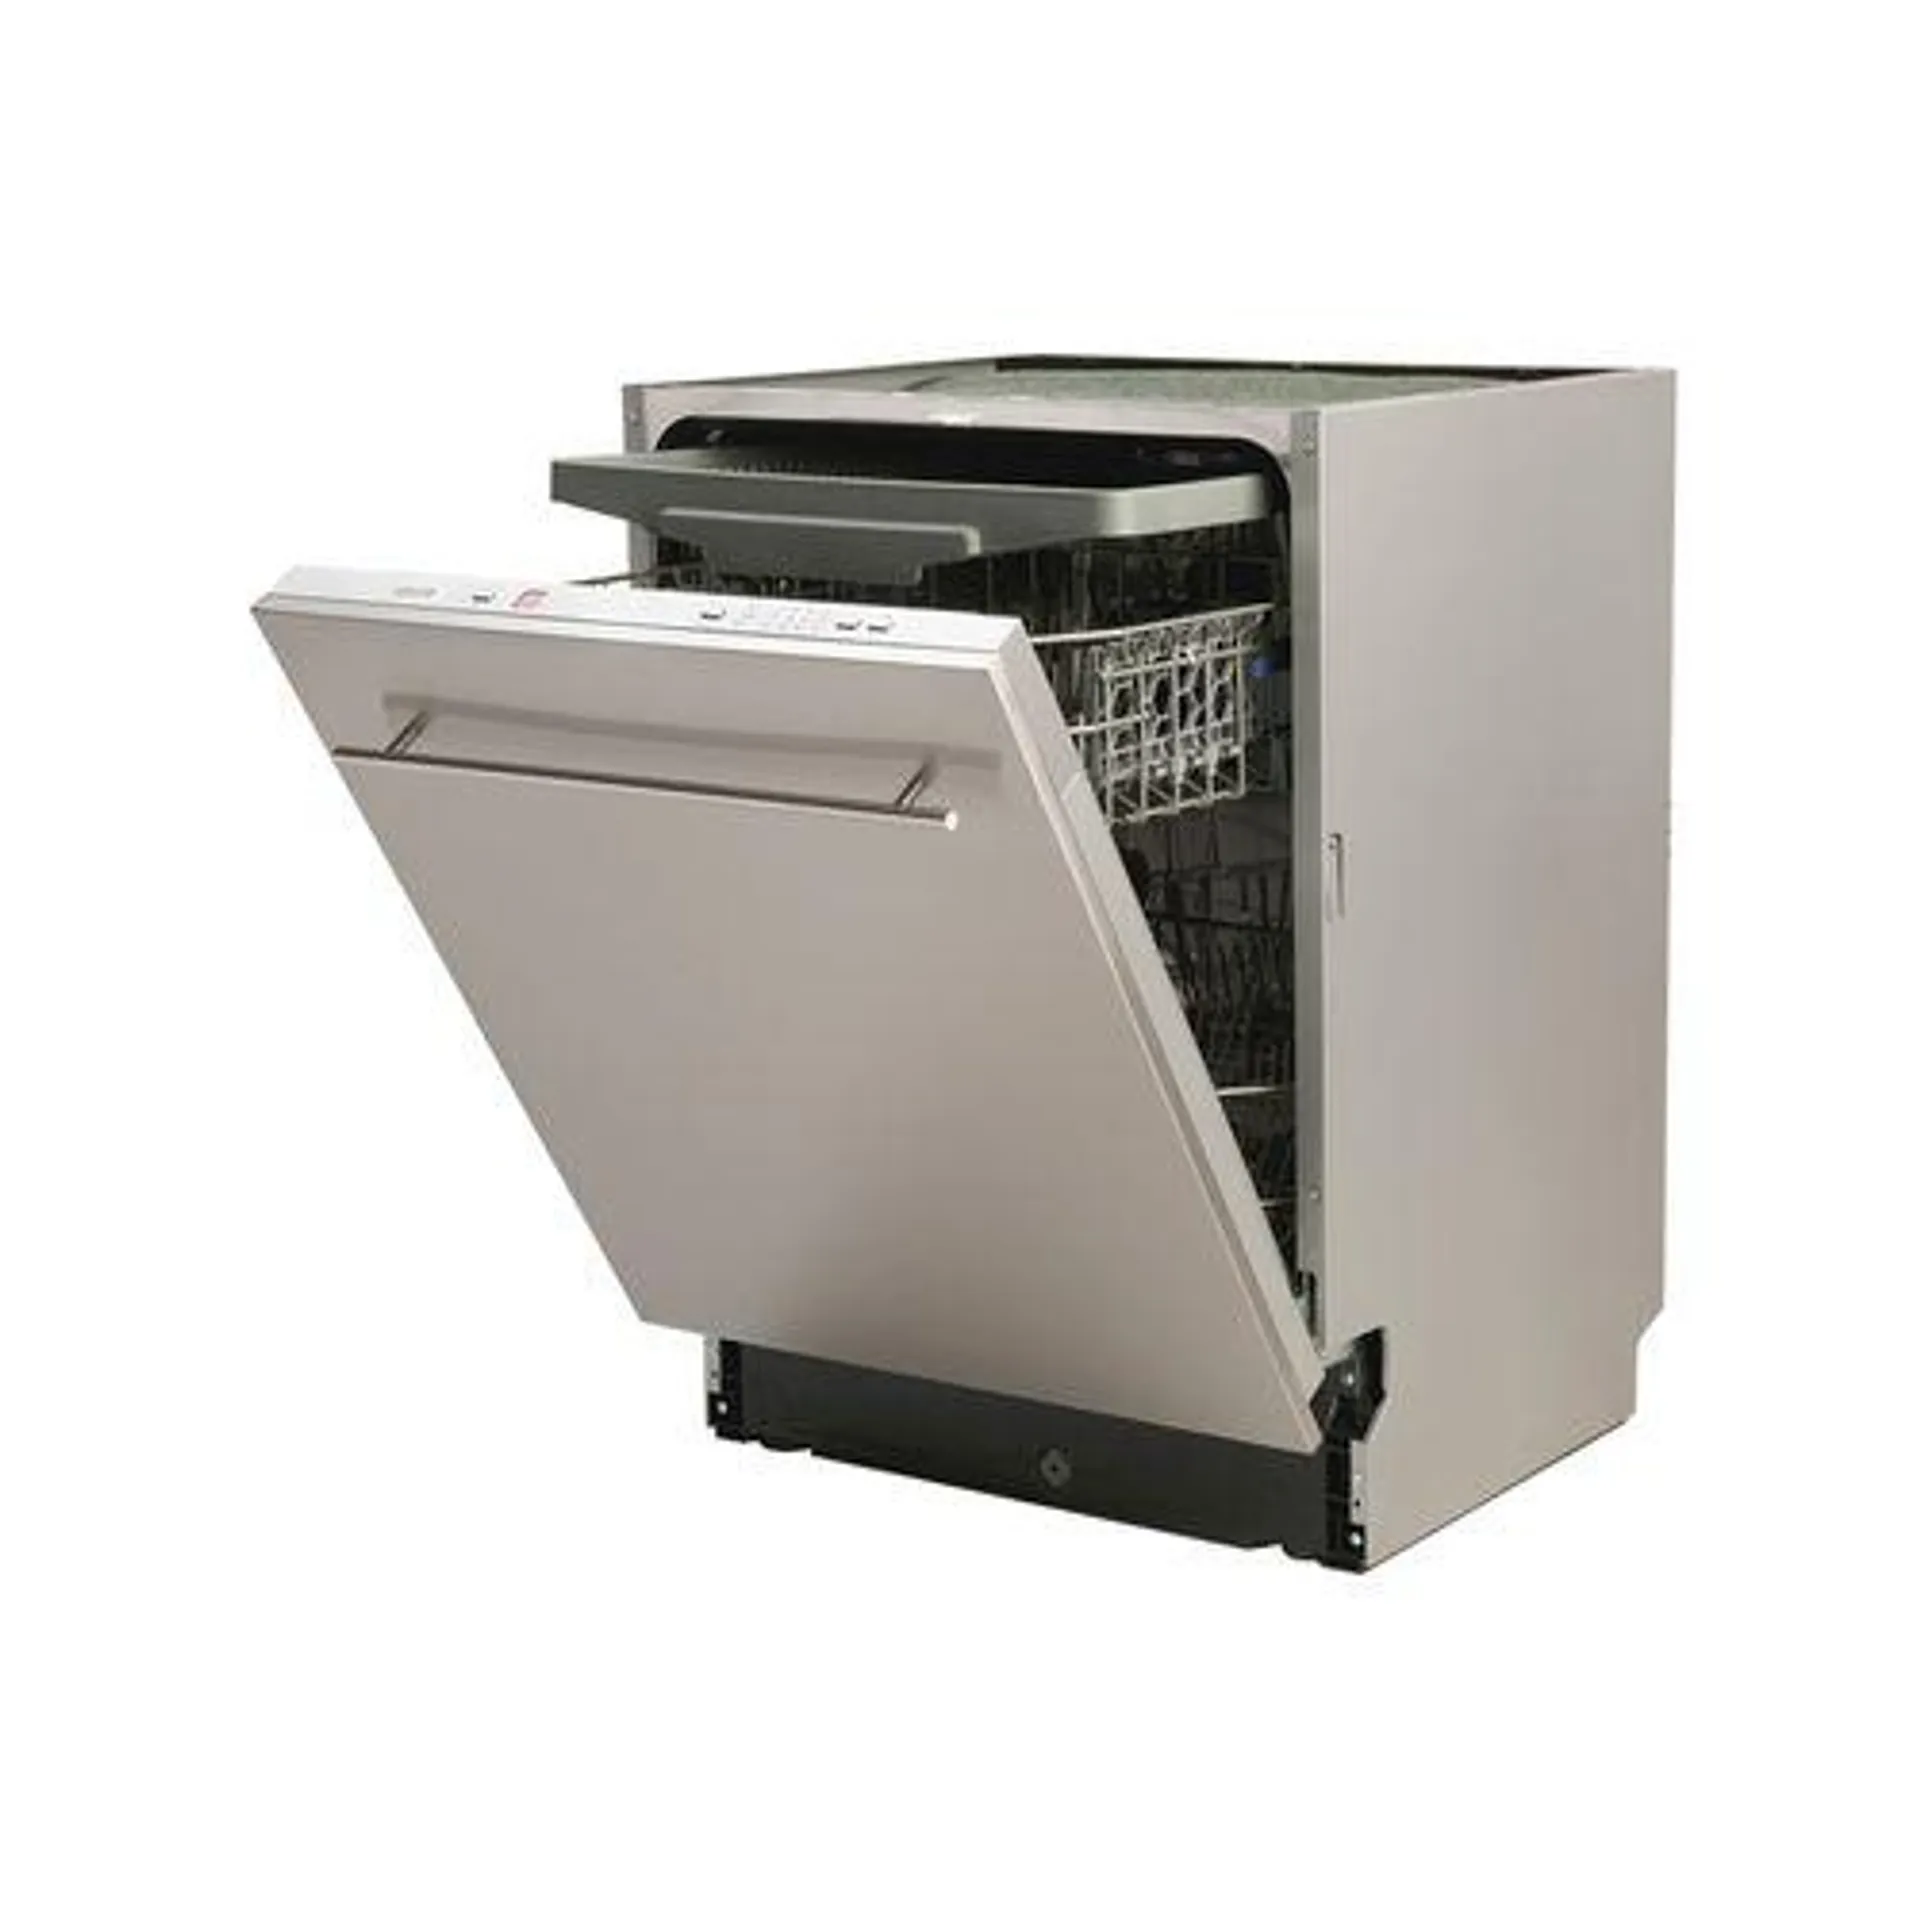 Euro 60cm Dishwasher - Trade Only WELS 4.5 Star 12L/W